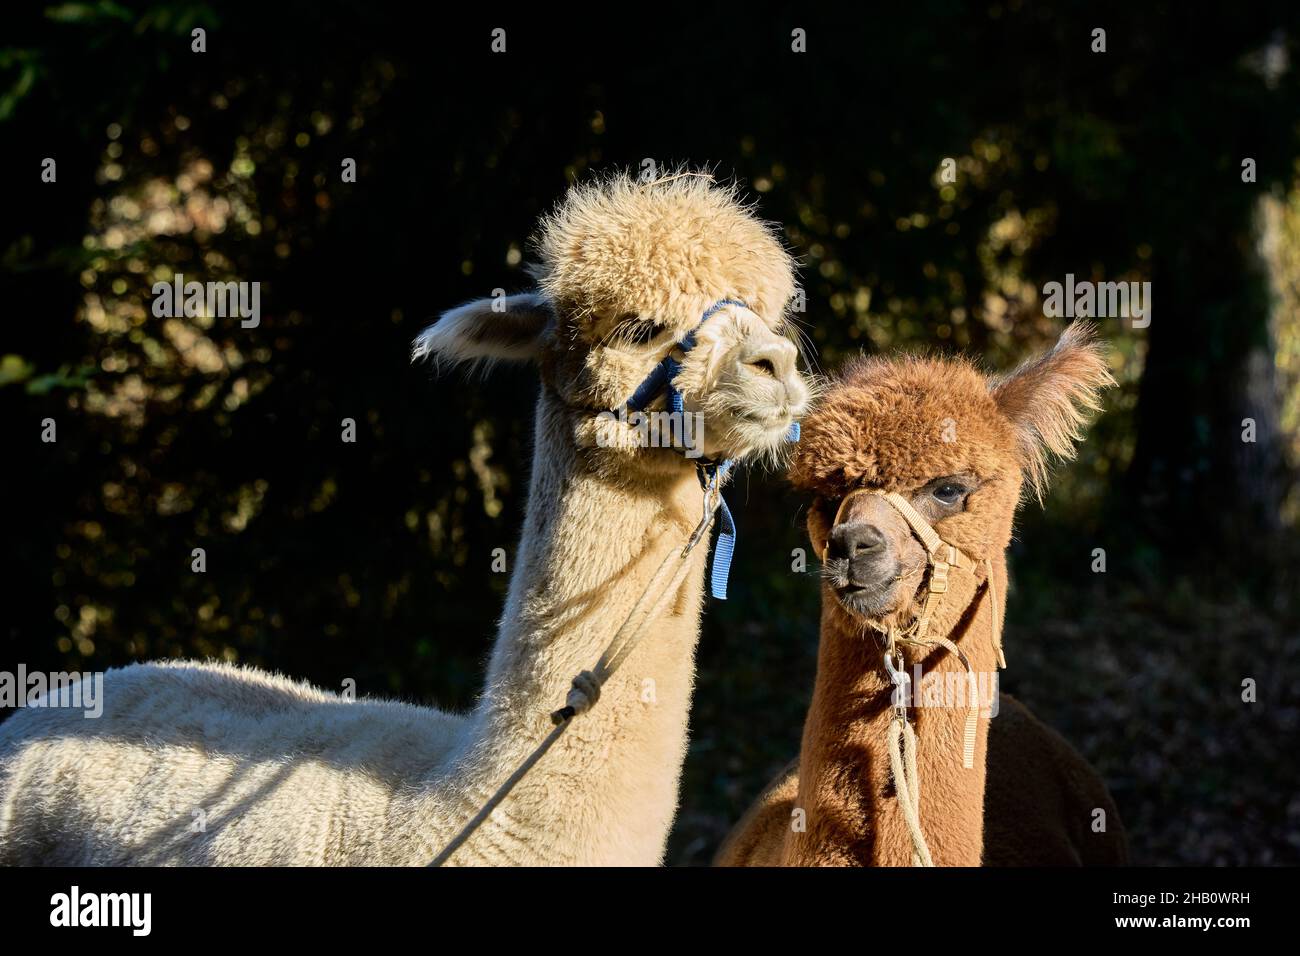 2 Two Alpacas, Beige And Brown, Adult And Youngster, Stand Together And Look Curiously Towards The Camera. Background Blurred Deciduous Hedge. Bauma Z Stock Photo